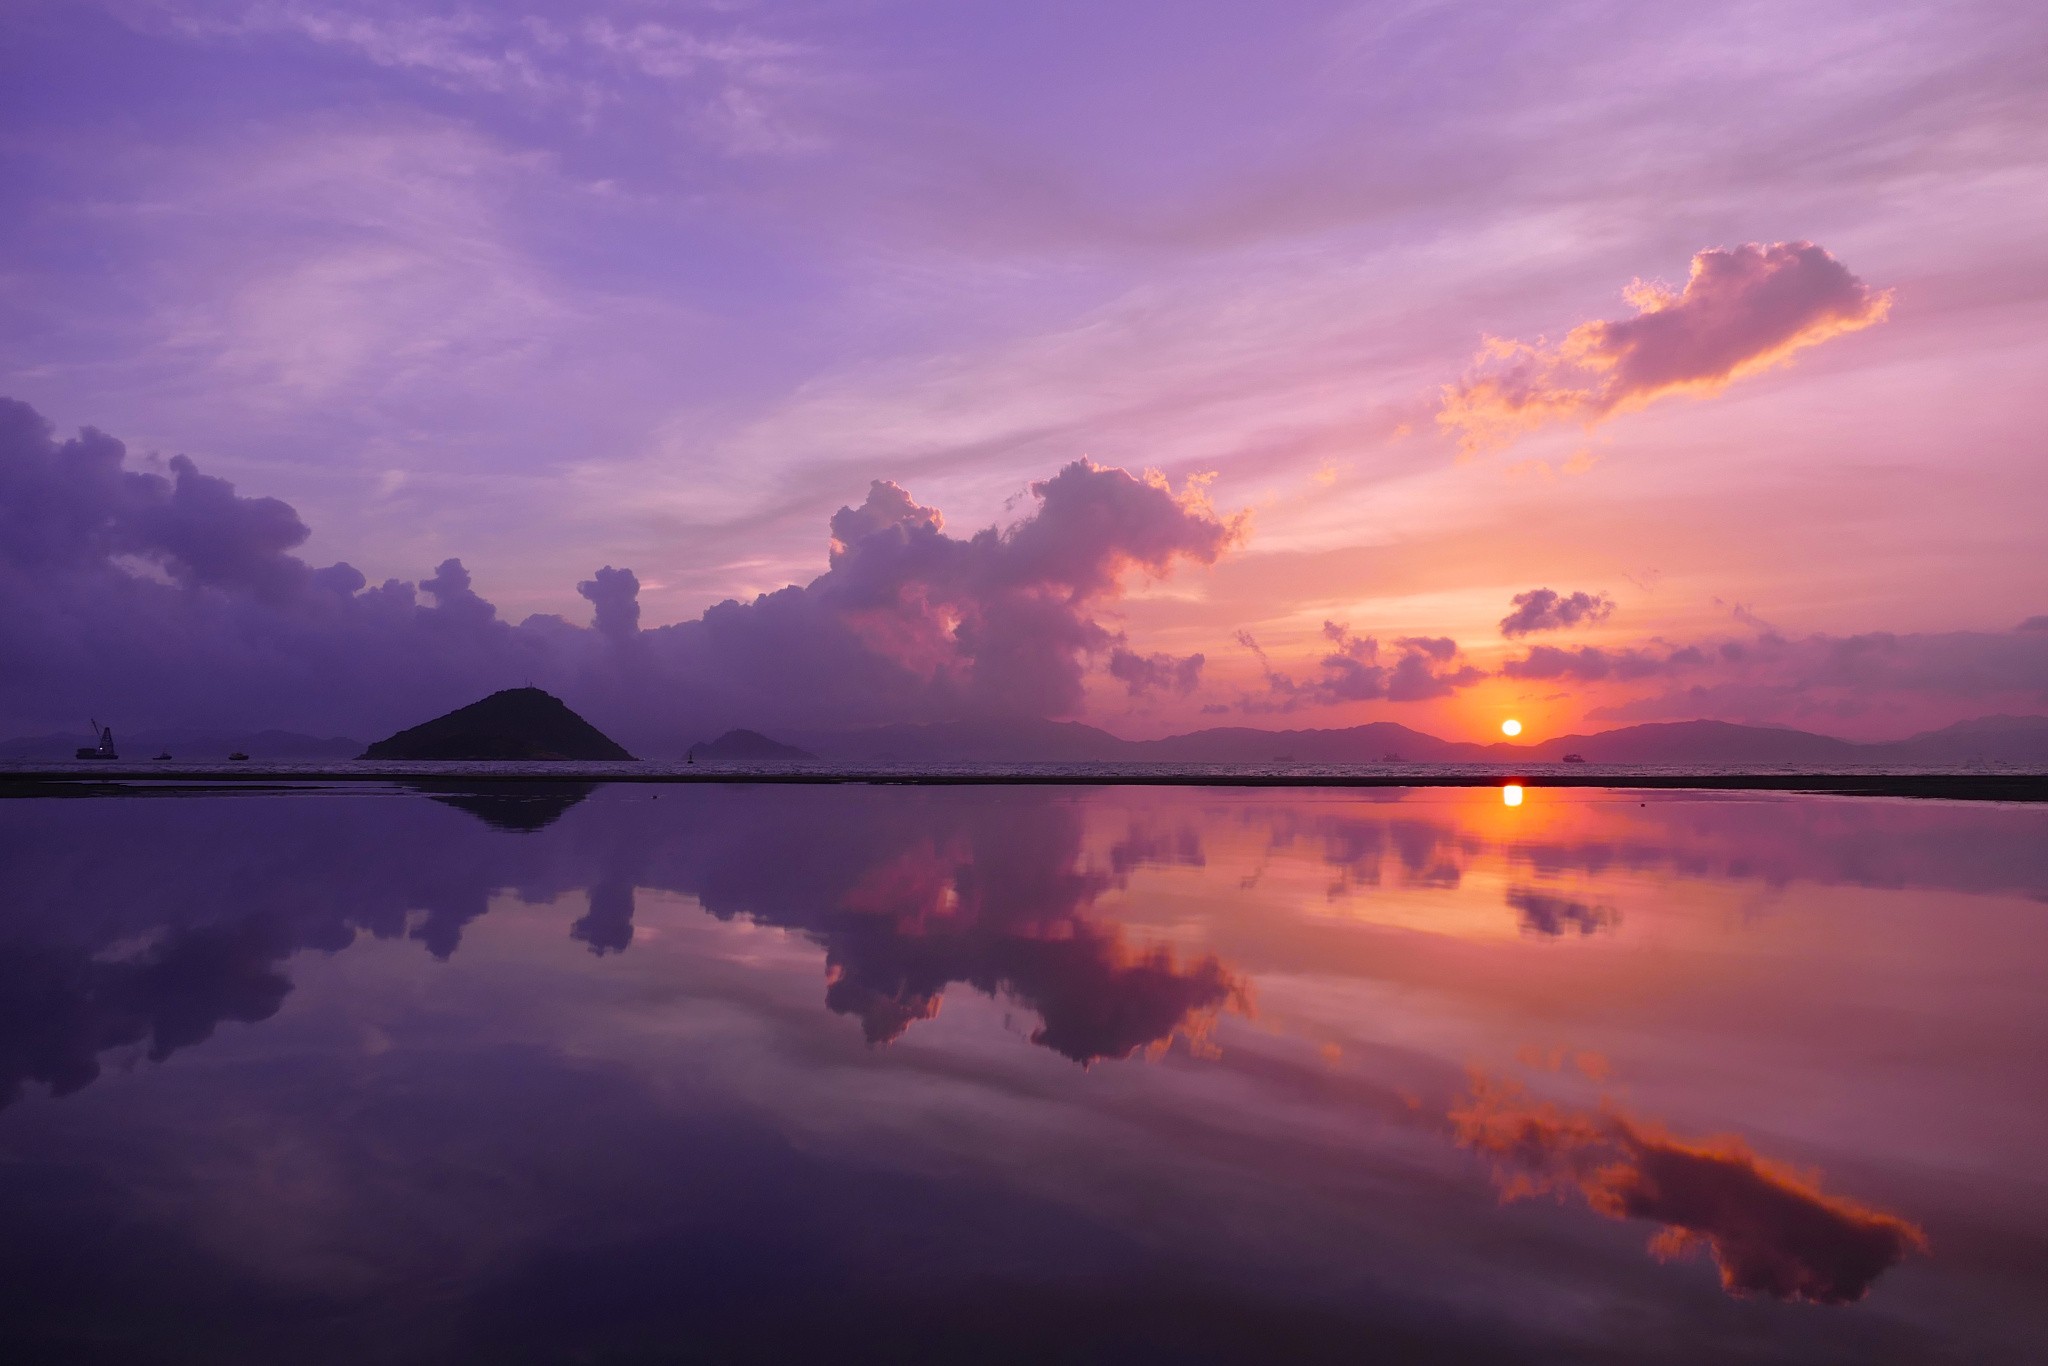 General 2048x1366 landscape nature water sunset clouds reflection mirrored calm waters sky sunlight